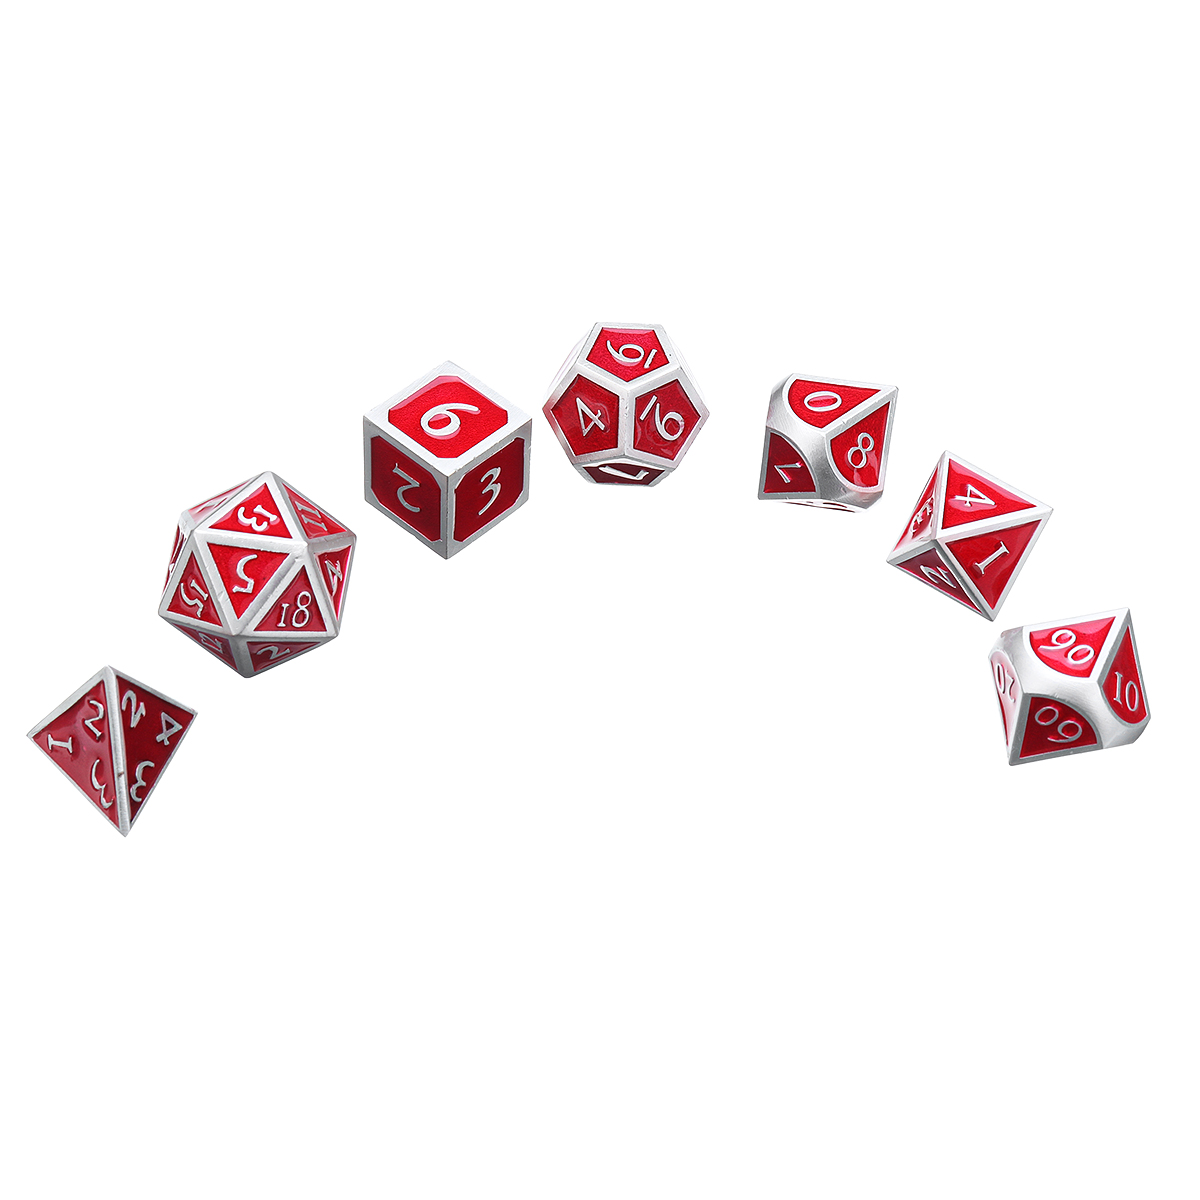 Red-Antique-Color-Solid-Metal-Polyhedral-Dices-Role-Playing-RPG-Gadget-7-Dice-Set-With-Bag-1425967-3